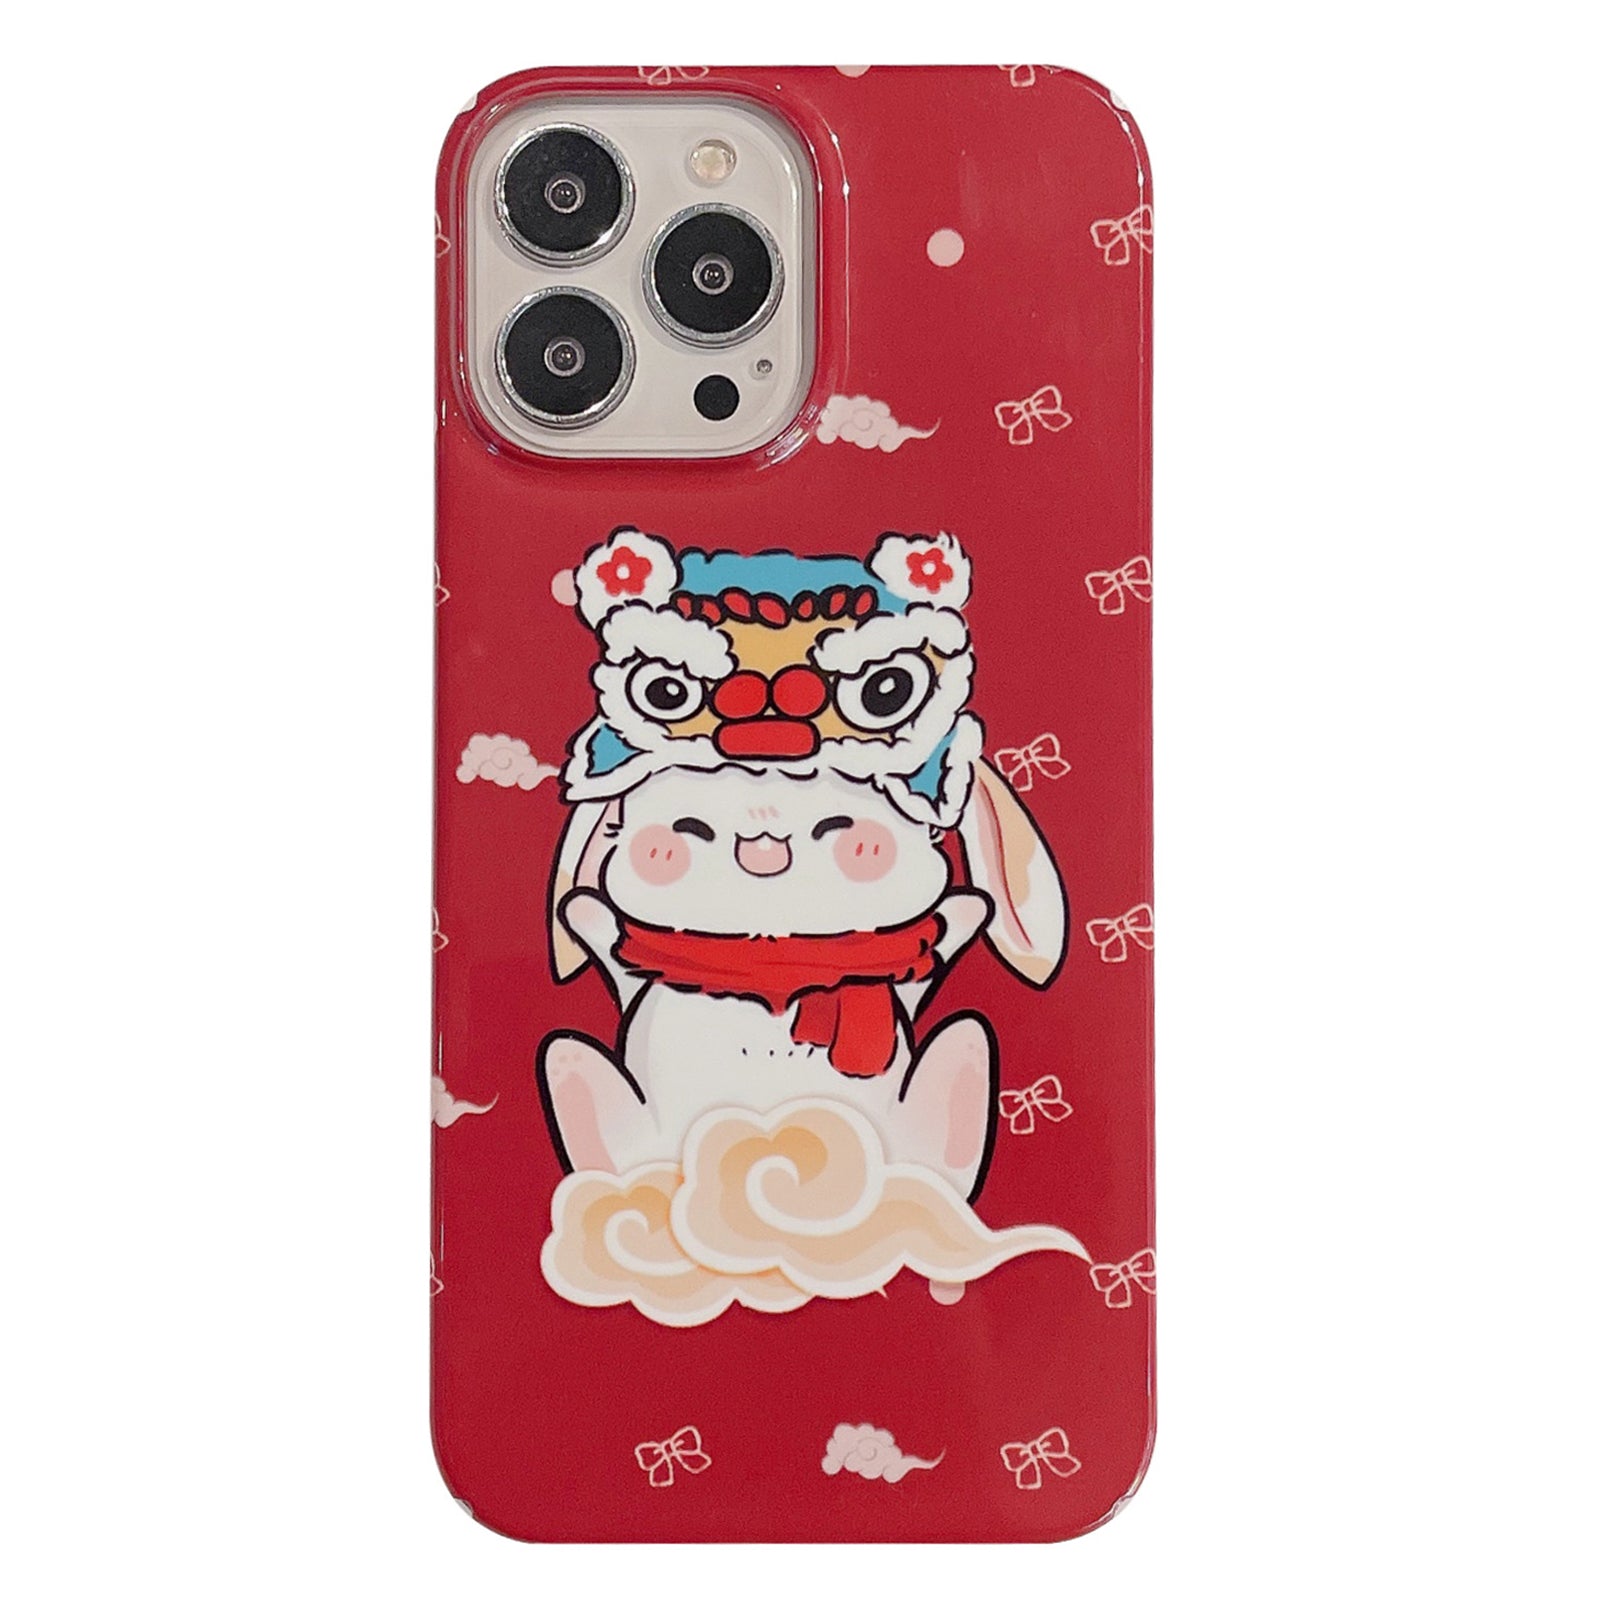 Uniqkart for iPhone 12 Pro Max 6.7 inch Hard PC Phone Case Pattern Printing Protective Glossy Phone Shell - Rabbit